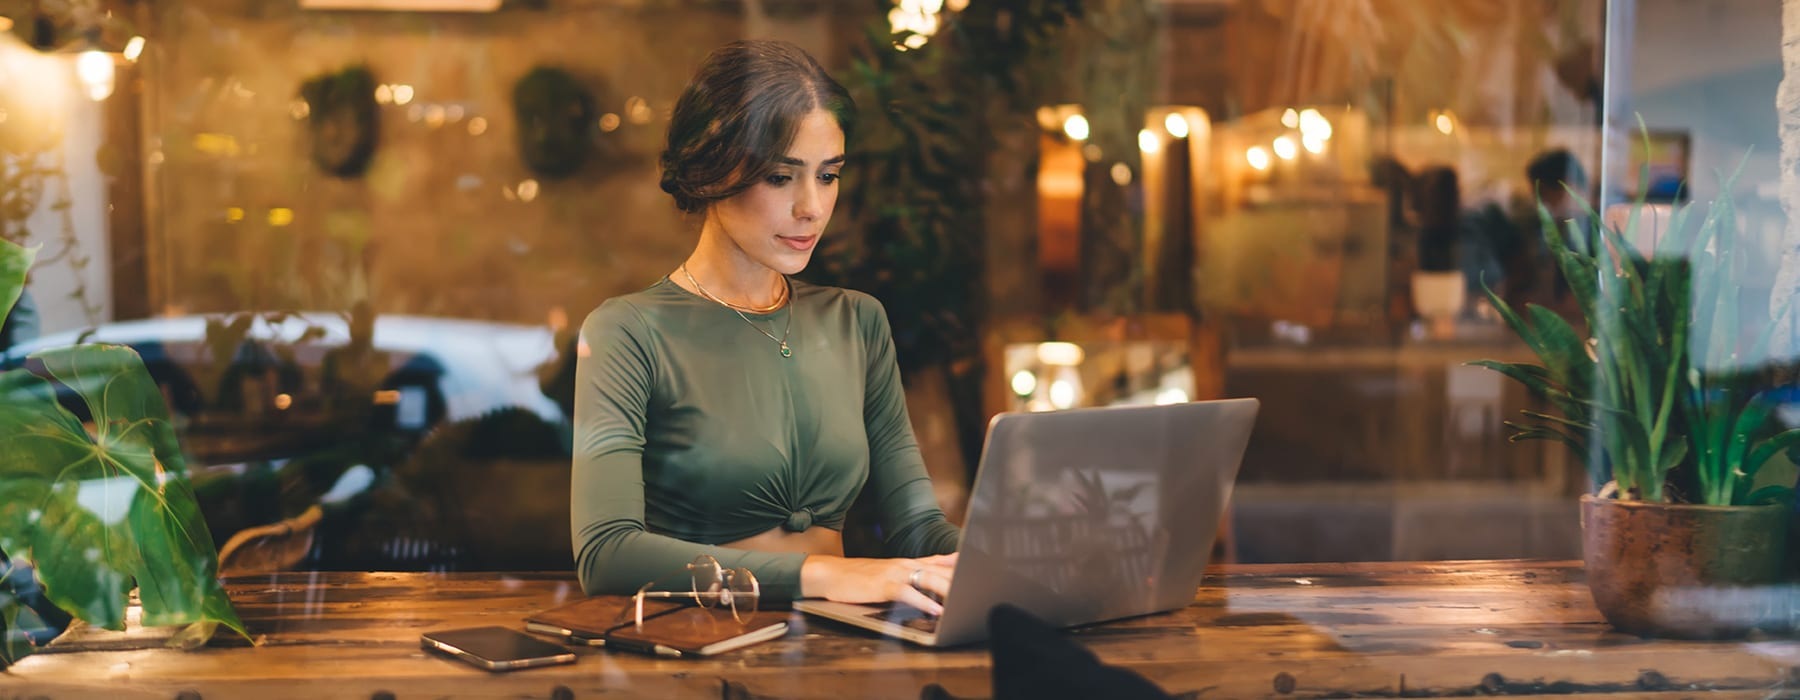 lifestyle image of a young woman sitting in a coffee shop and working on a laptop